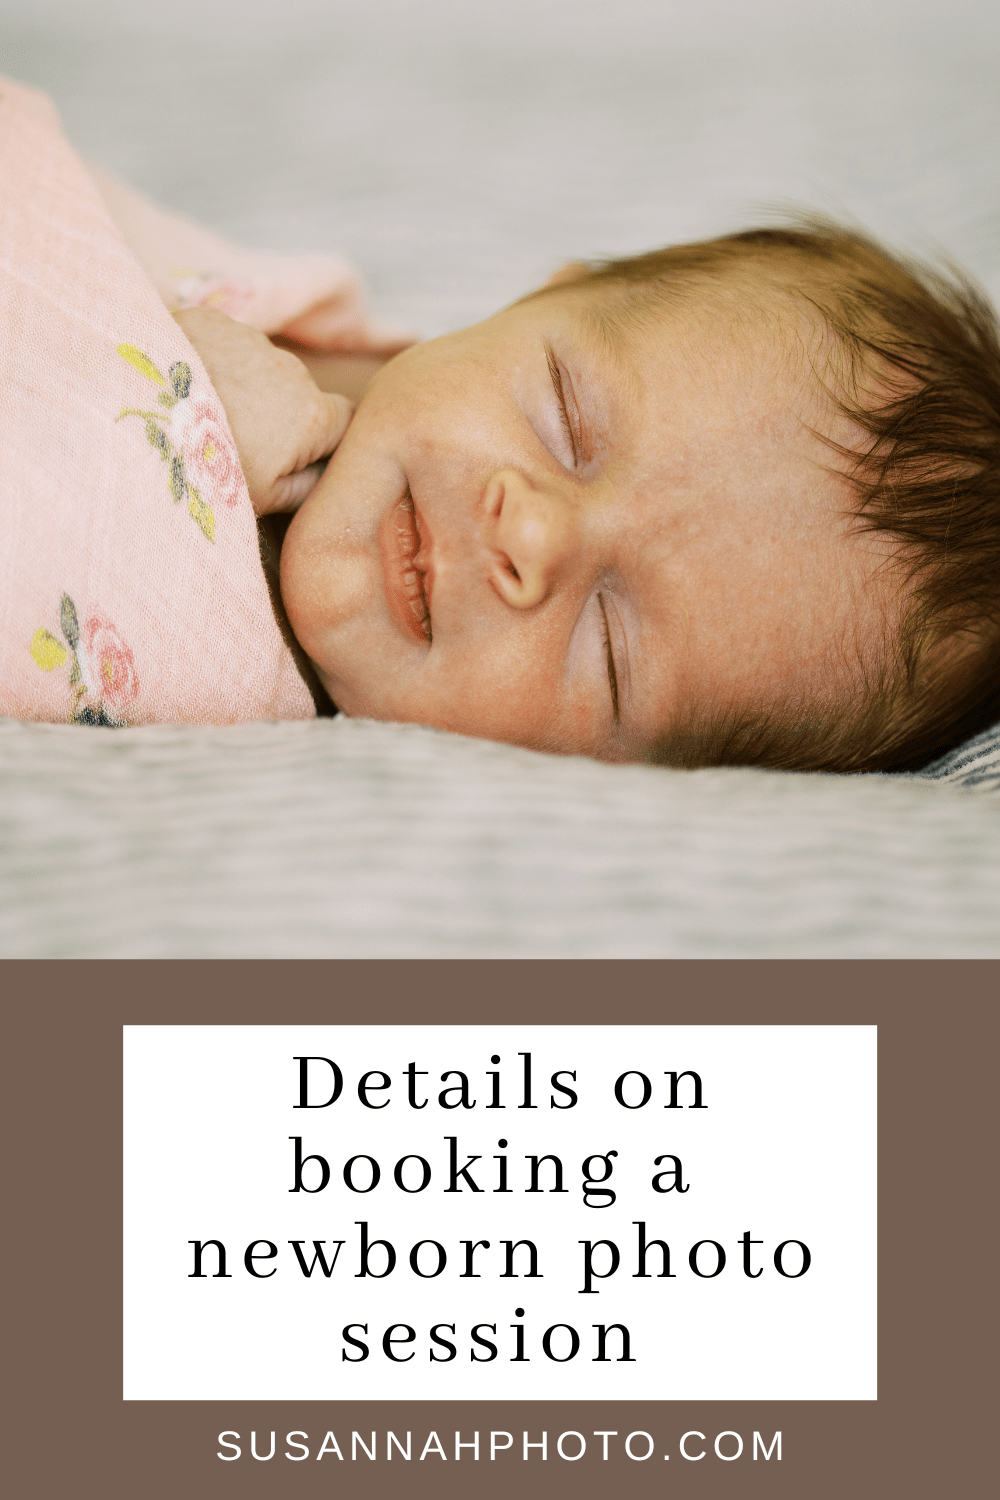 a photo of a cute sleeping newborn baby who is smiling. text below photo reads "details on booking a newborn photo session"